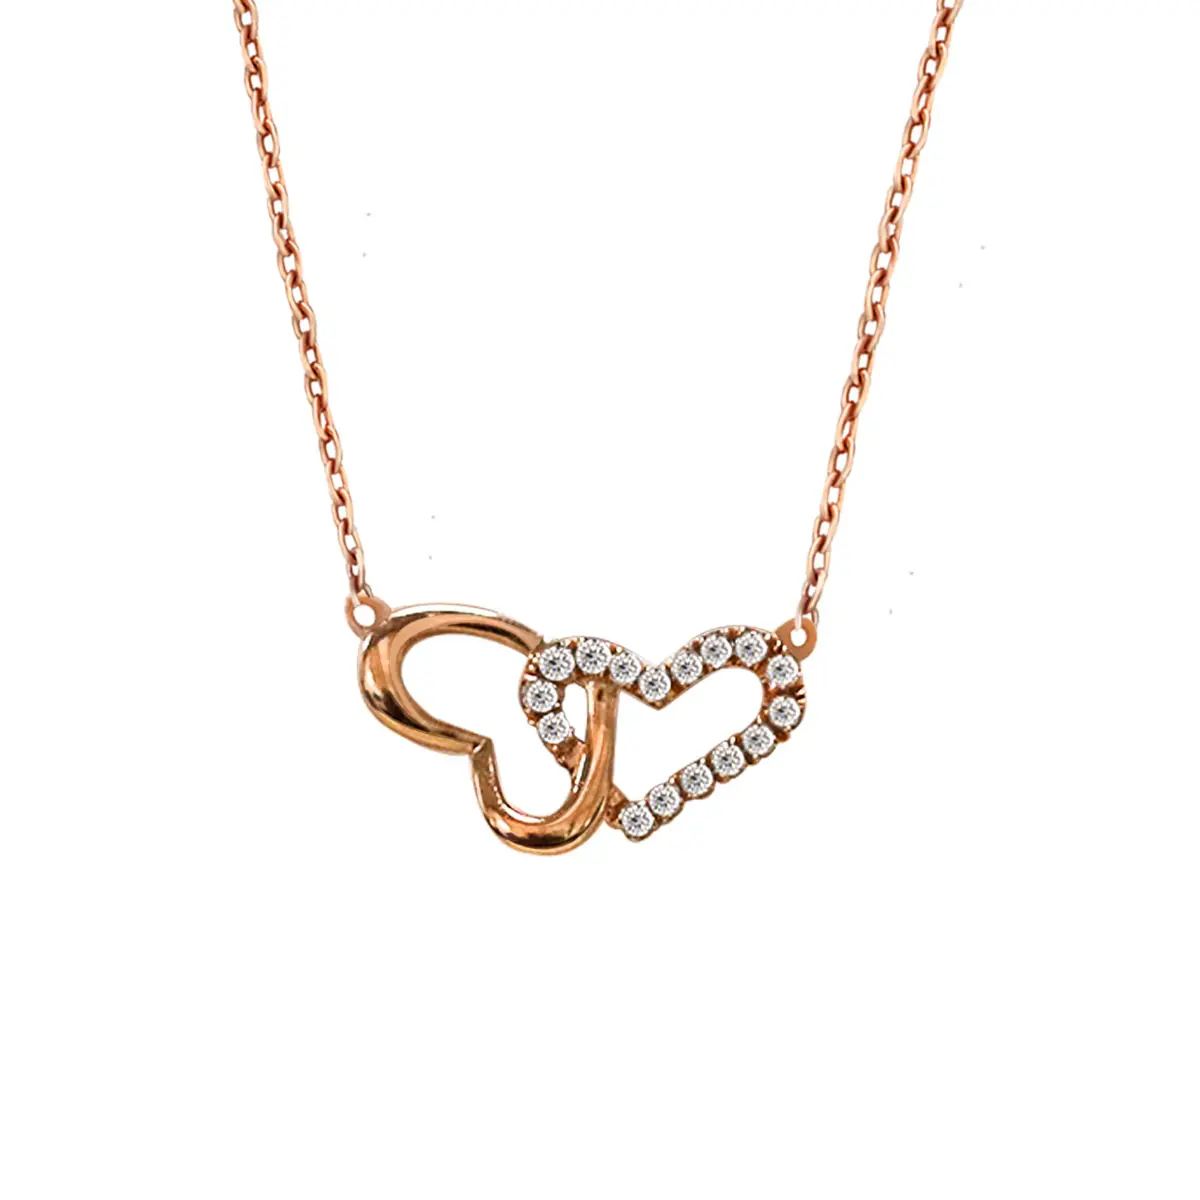 Wholesale Factory Lovely 18K Solid Rose Gold Diamond Pendant Heart Shape Necklace Jewelry for Women Gift